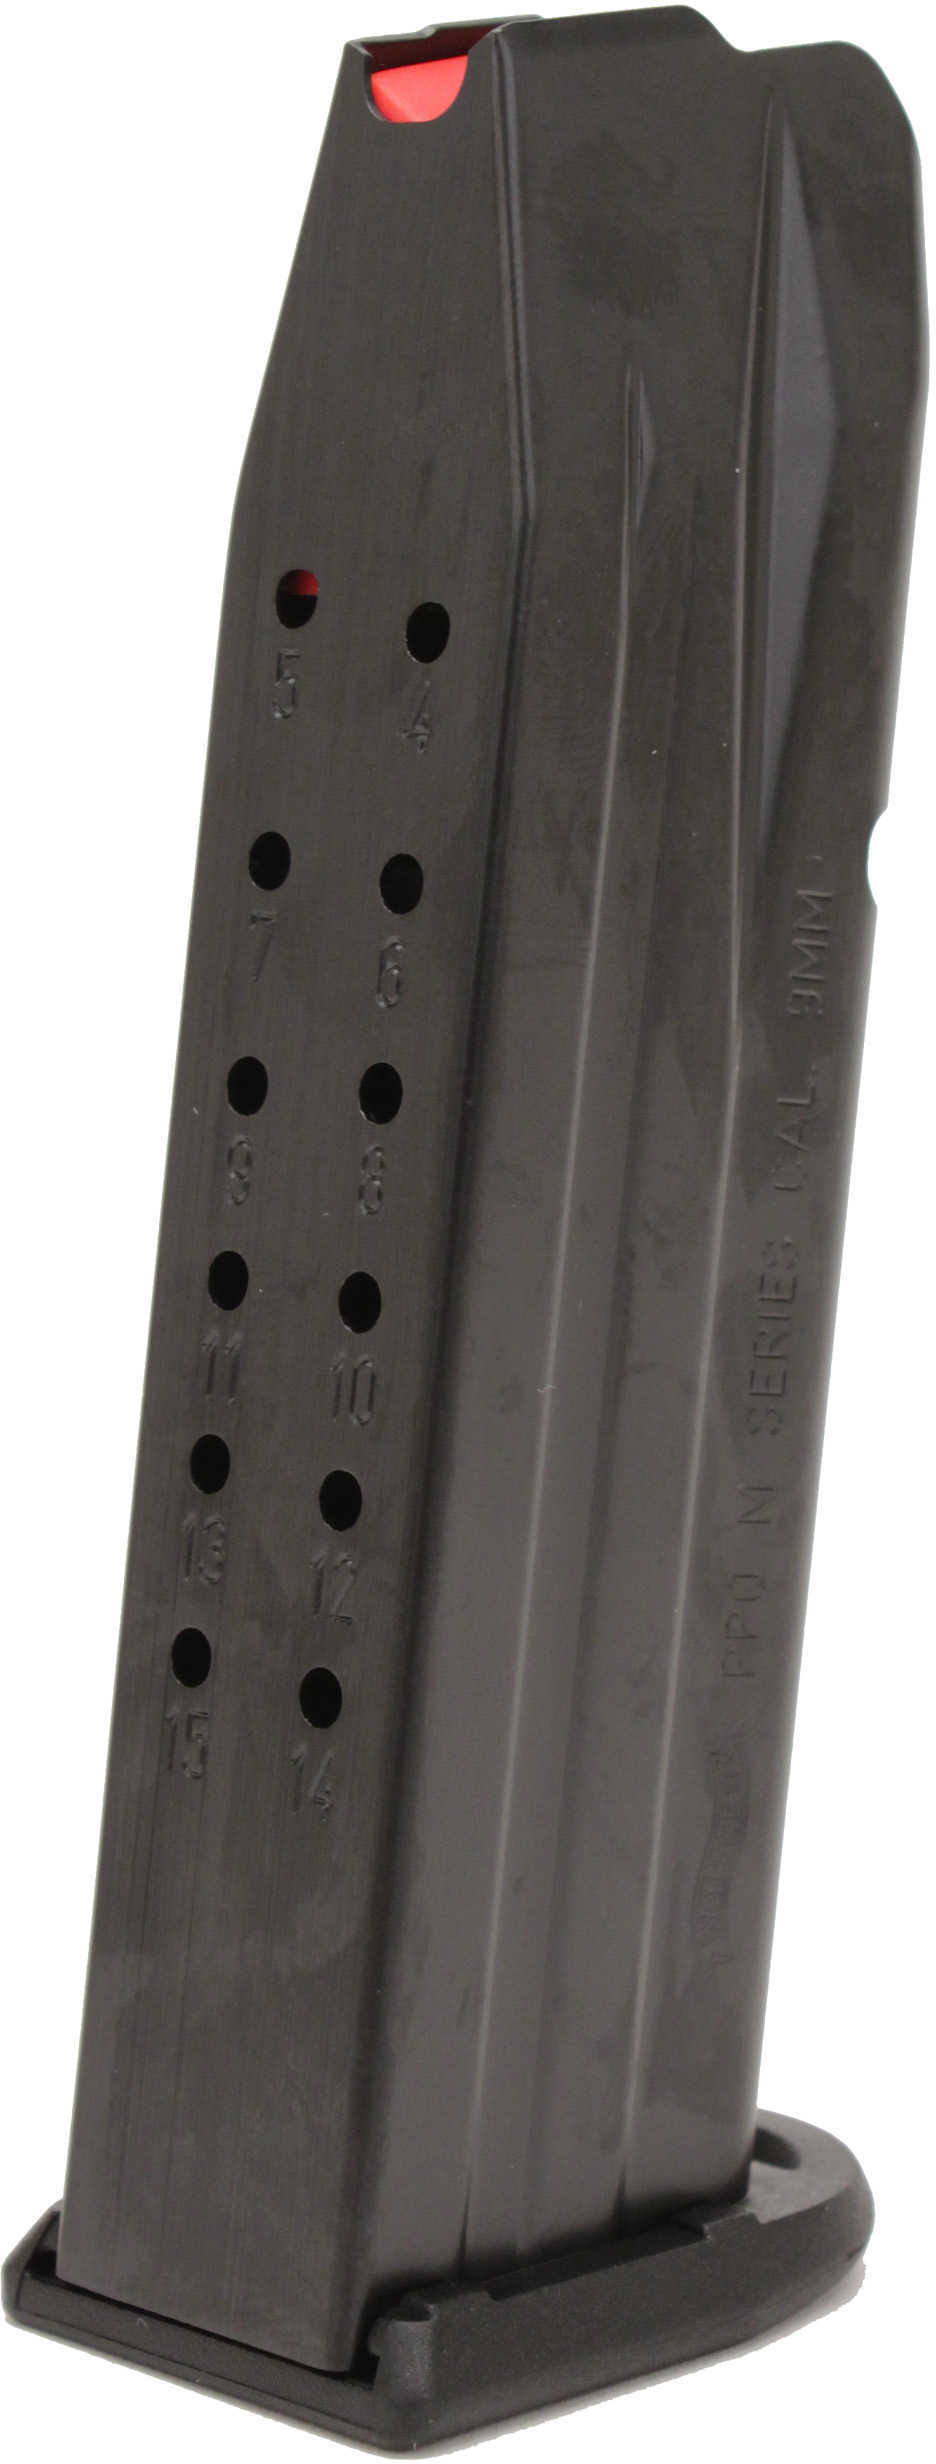 Walther PPQ M2 Magazine 9mm Afc Black Stainless 15/Rd